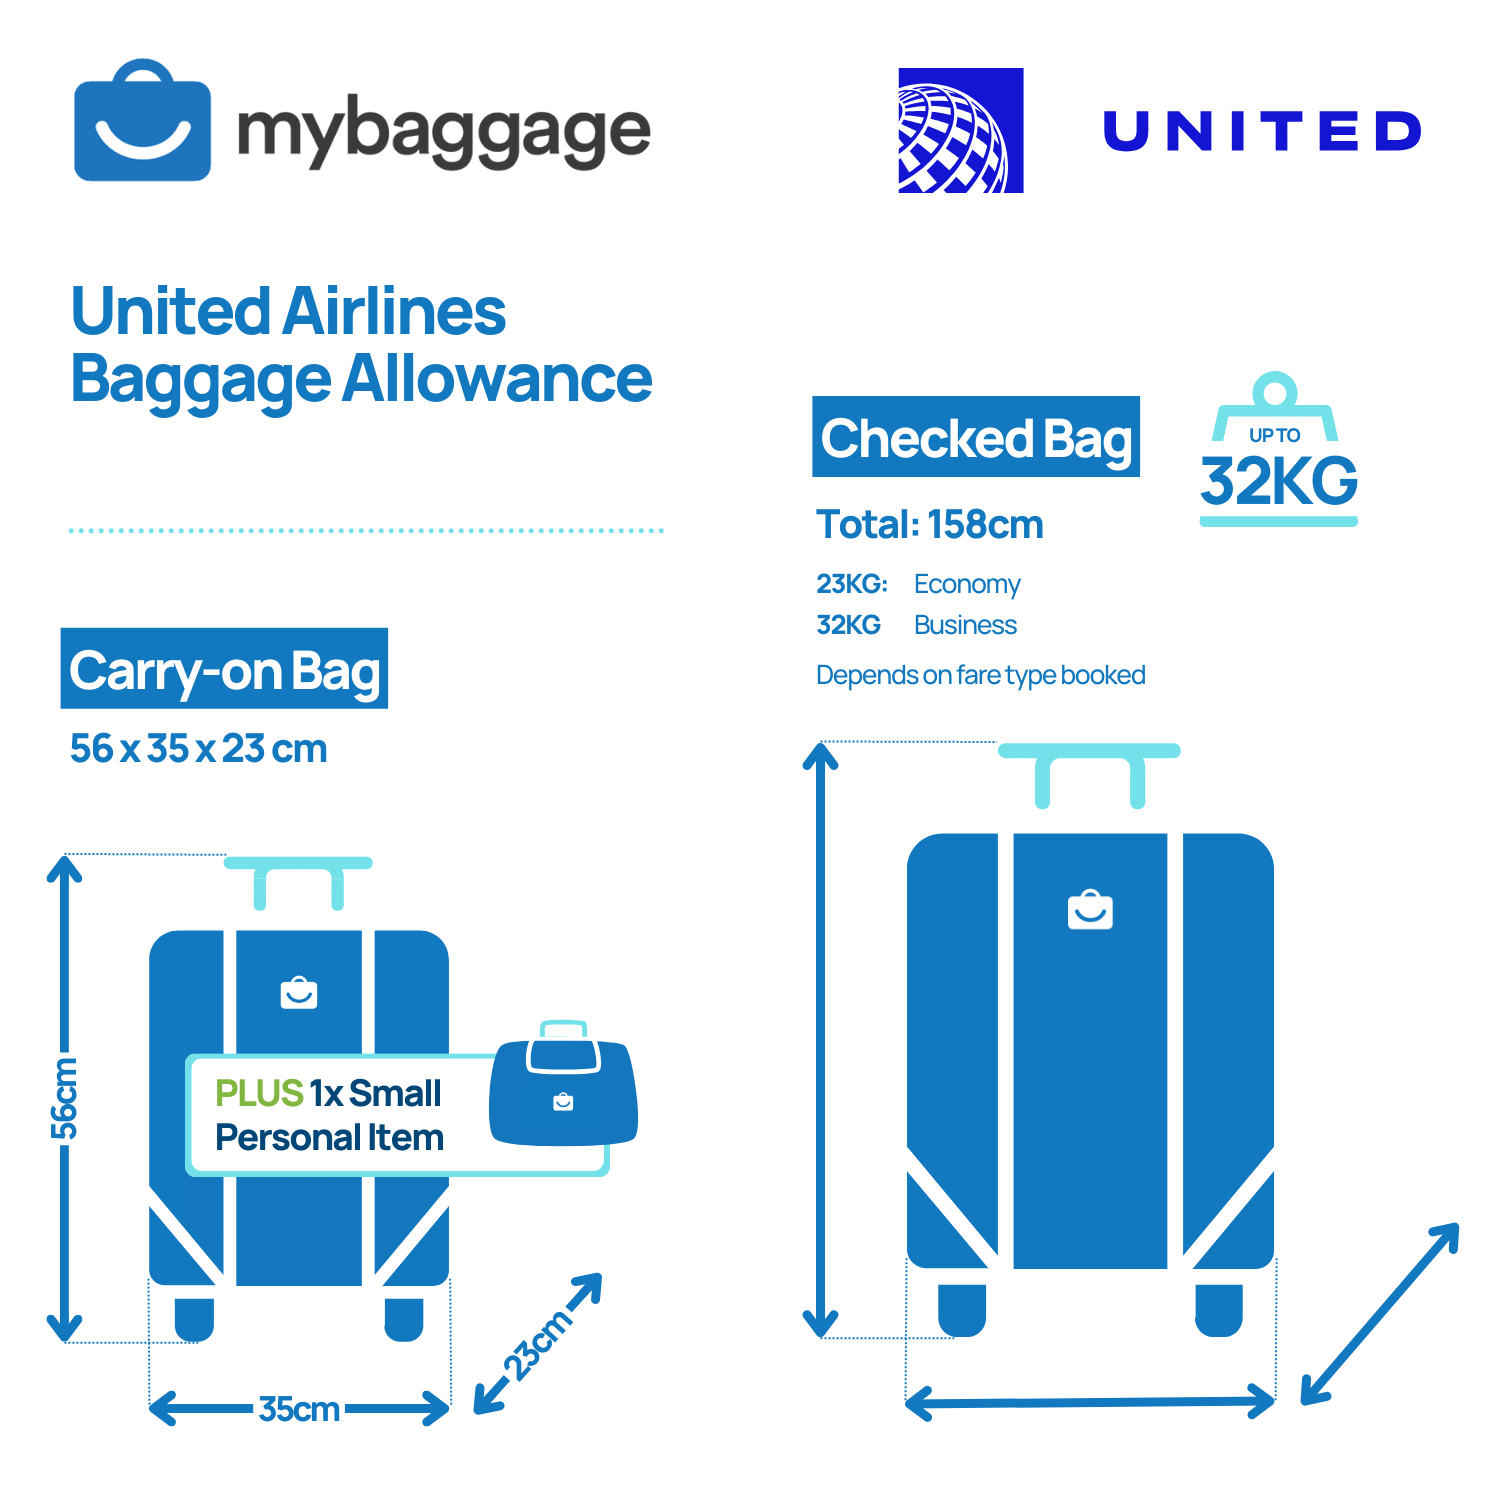 United Airlines Baggage Allowance